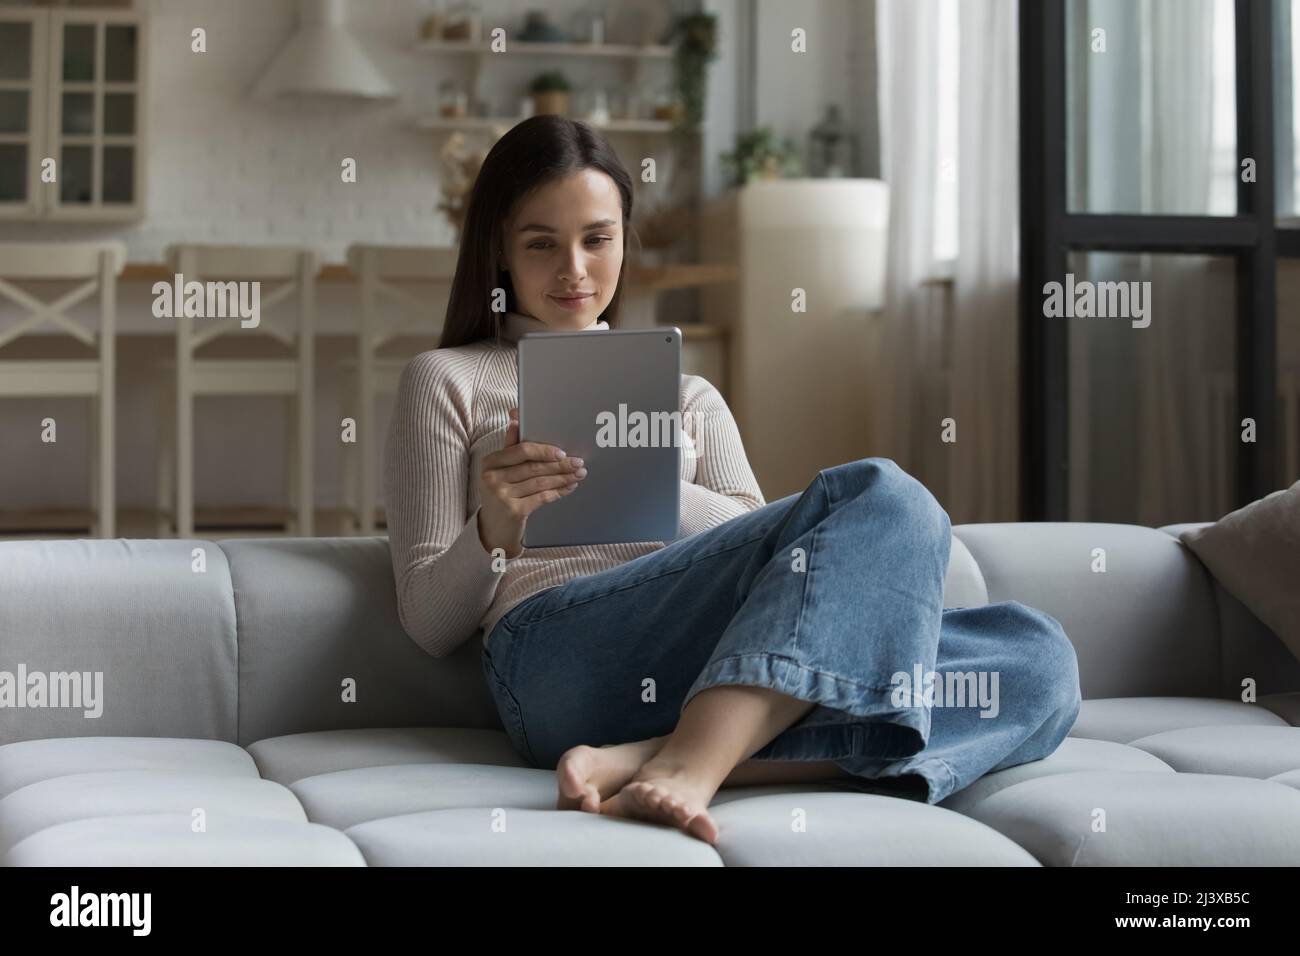 Positive focused millennial young woman using tablet computer Stock Photo